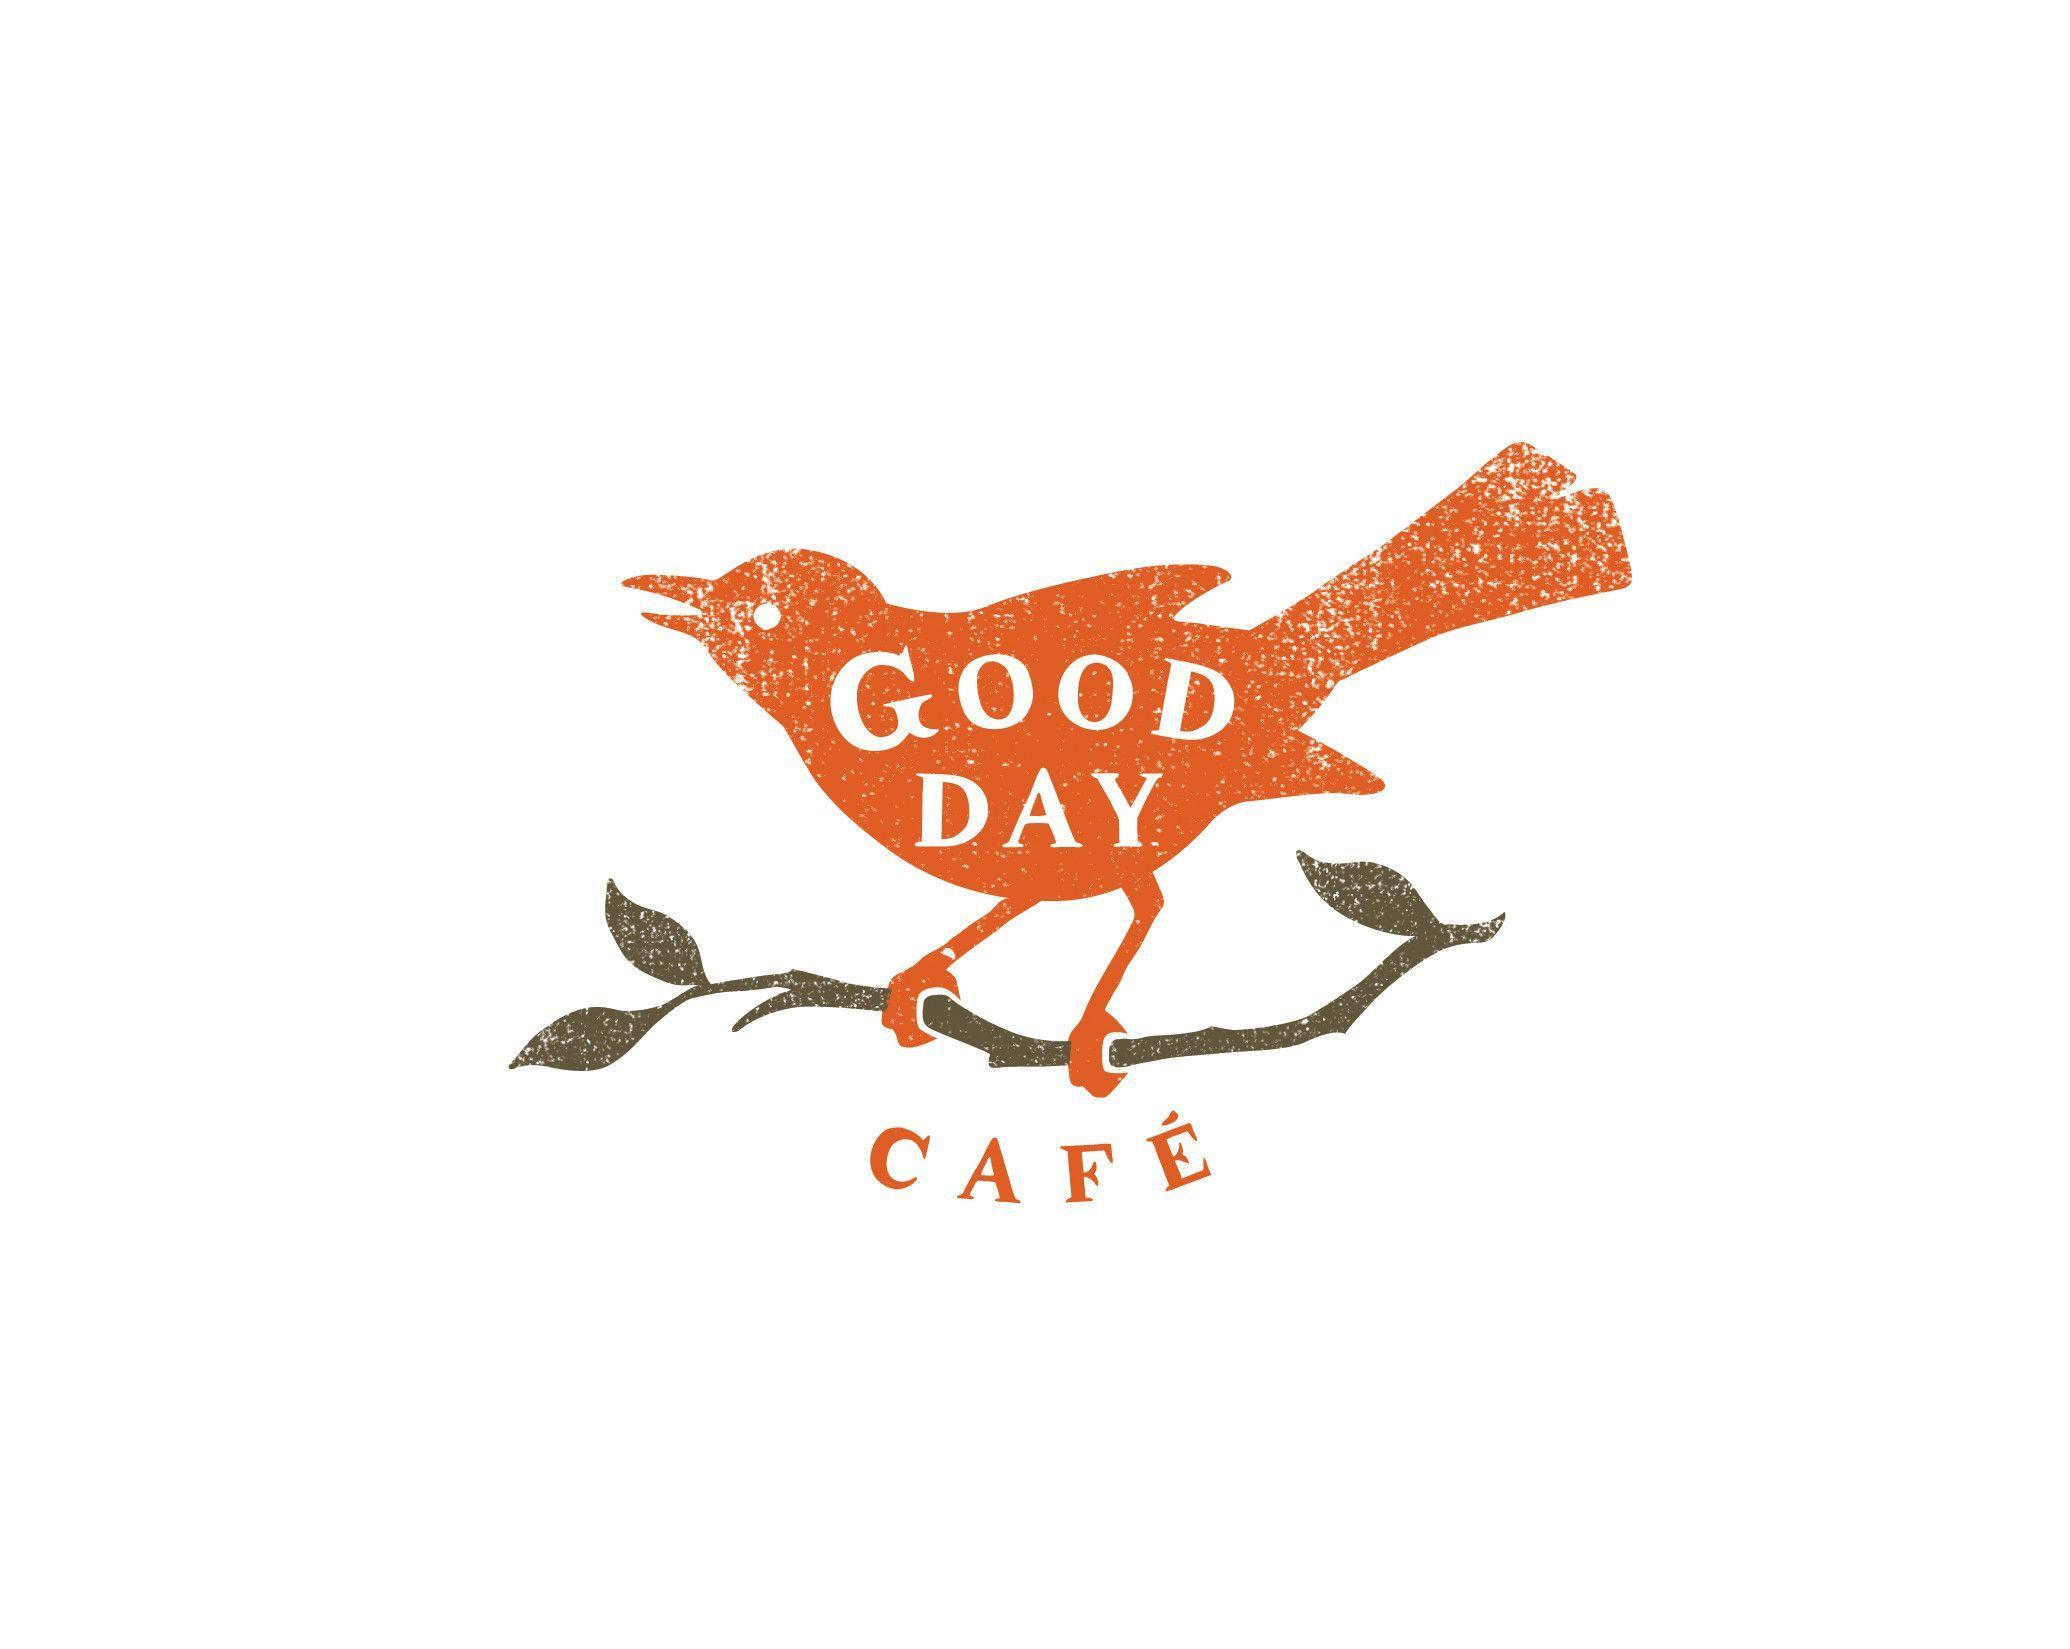 Cute Cafe Logo - This stamped logo just killed me, it's too cute! | Graphically Typed ...